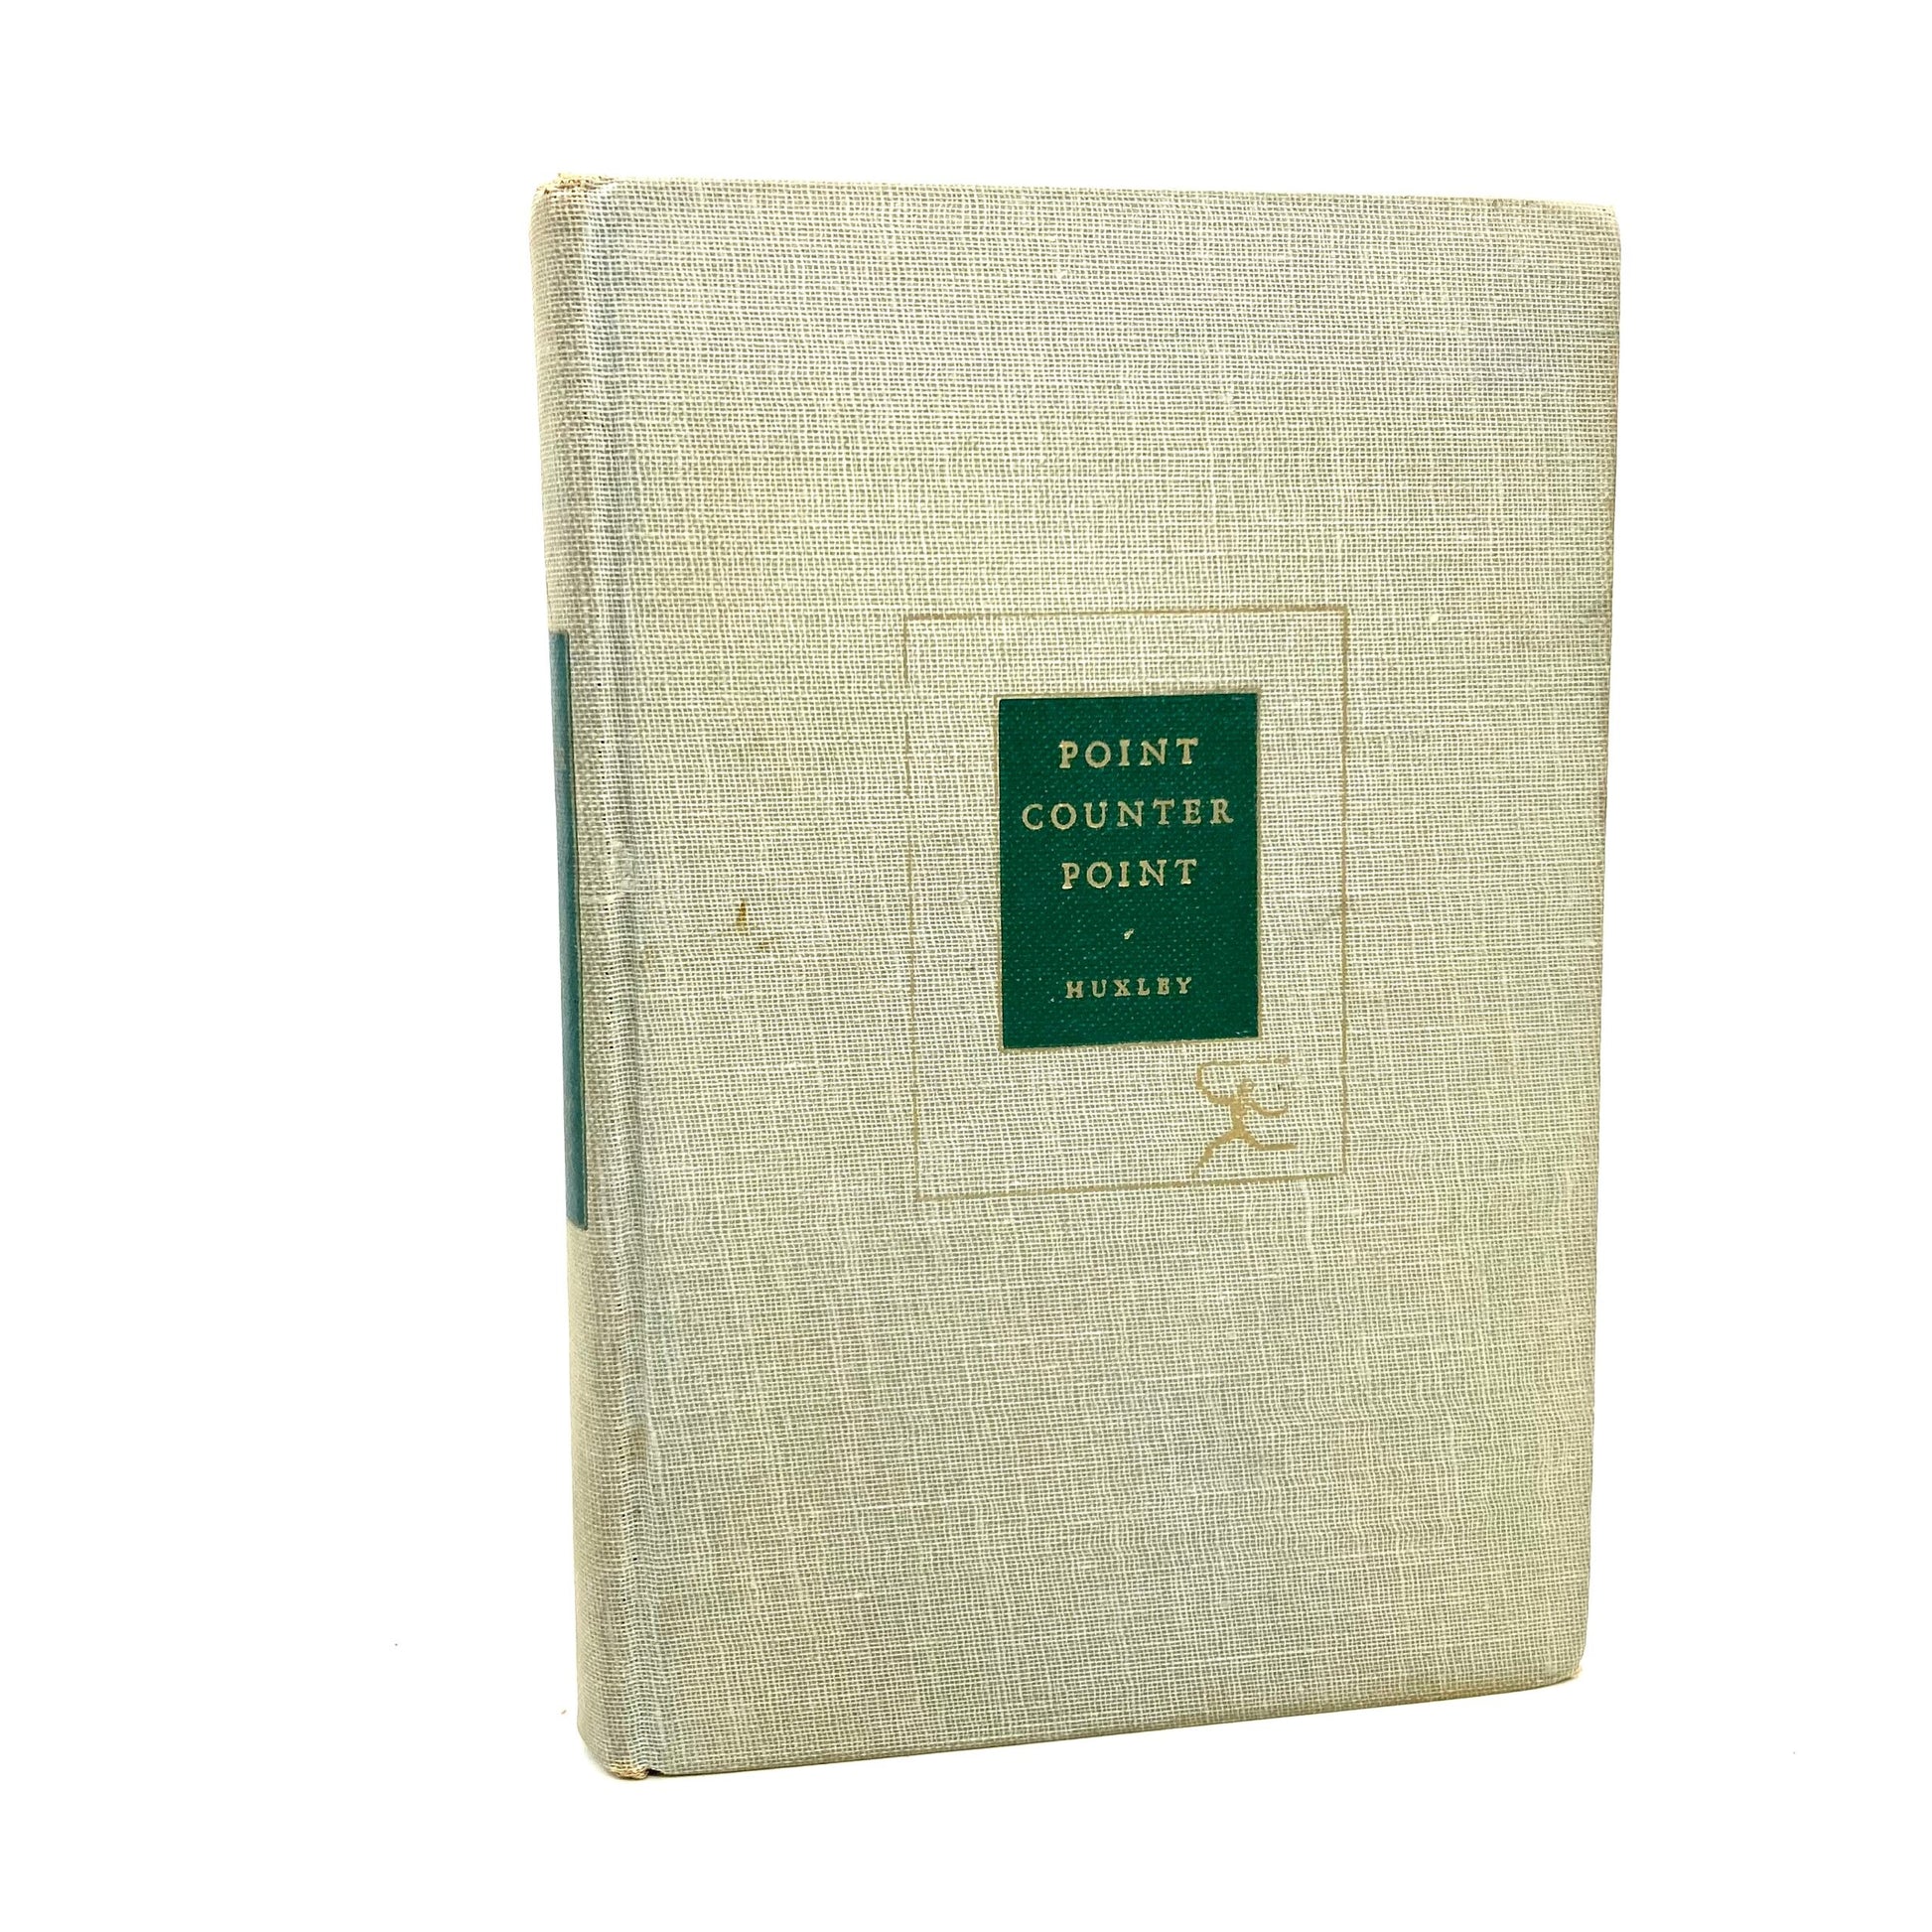 HUXLEY, Aldous "Point Counter Point" [Modern Library, 1928] - Buzz Bookstore